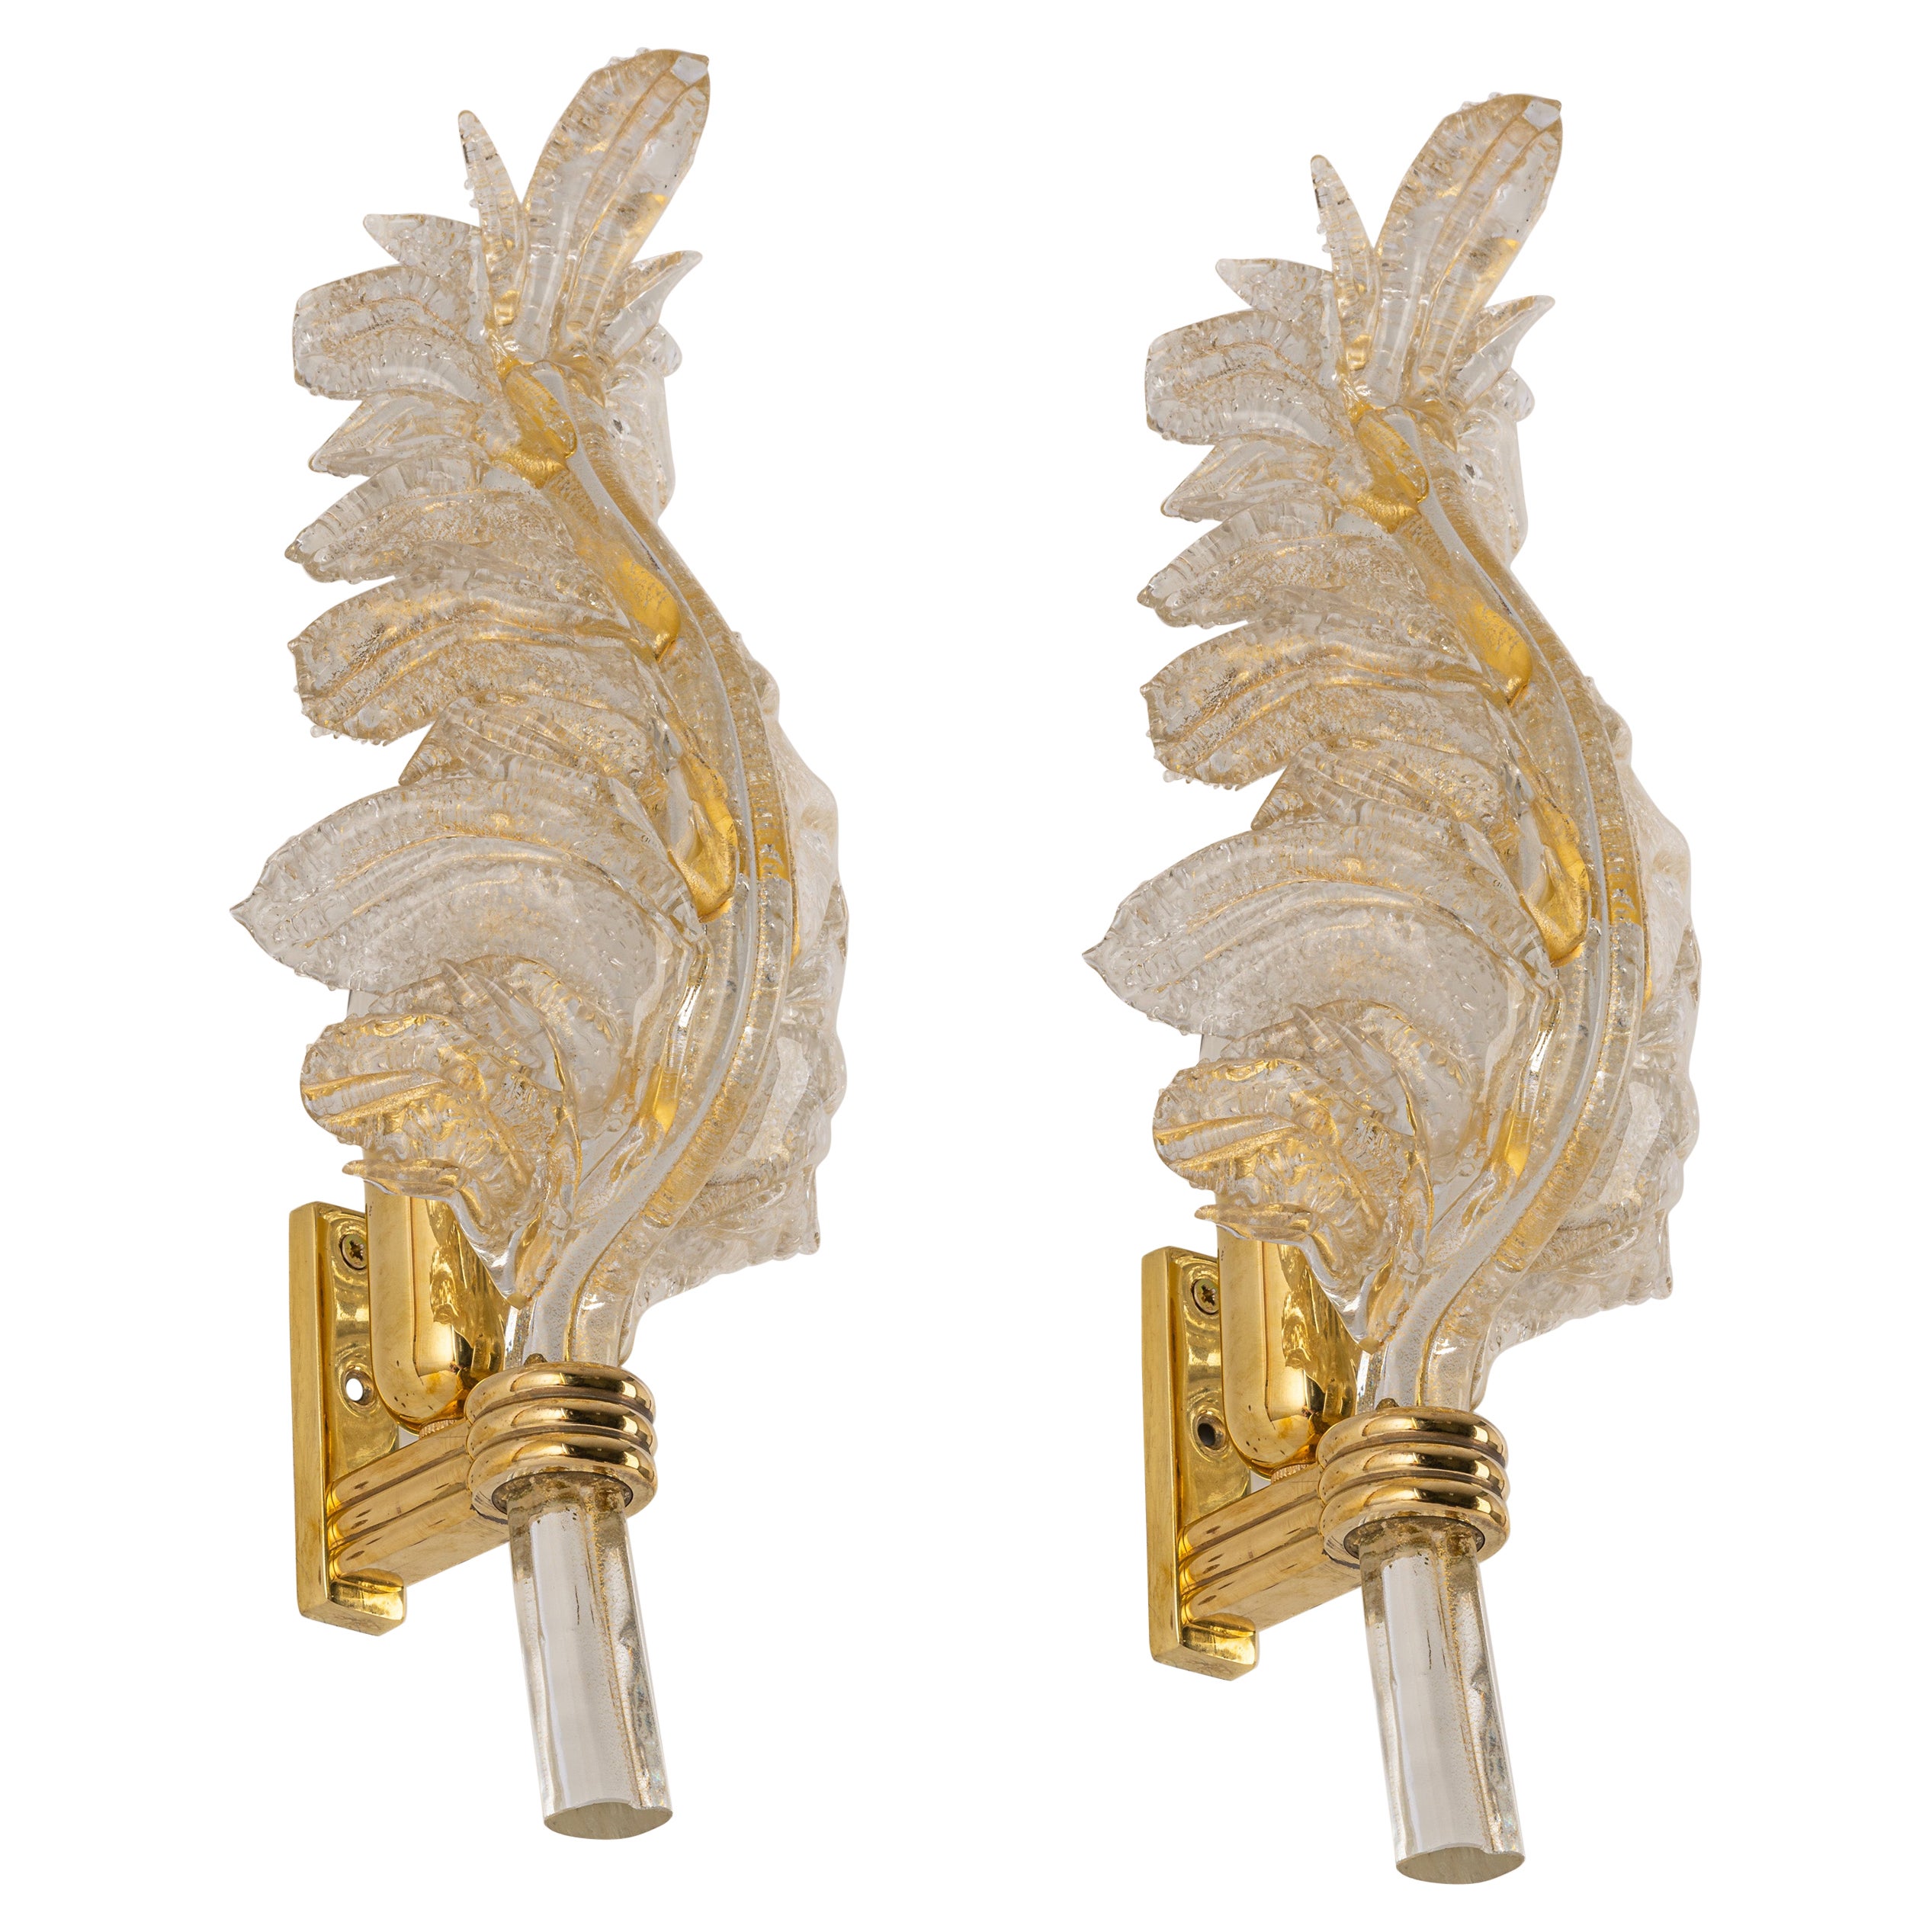 Pair of Large Murano Glass Wall Sconce by Barovier & Toso, Italy, 1970s